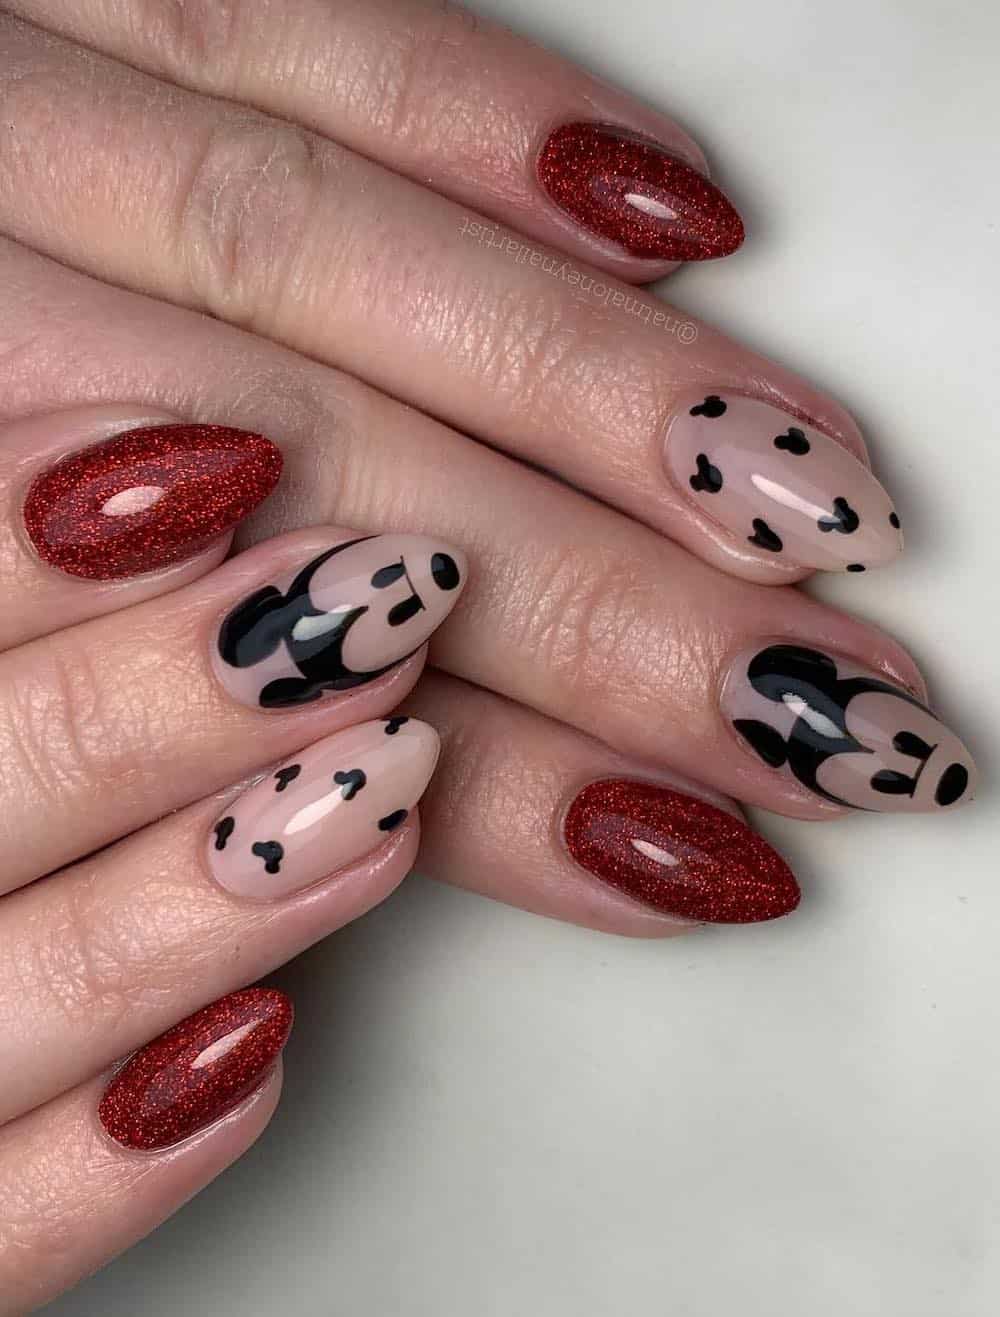 Medium almond nails with a Mickey Mouse design featuring nude polish, glittering red polish, and black nail art